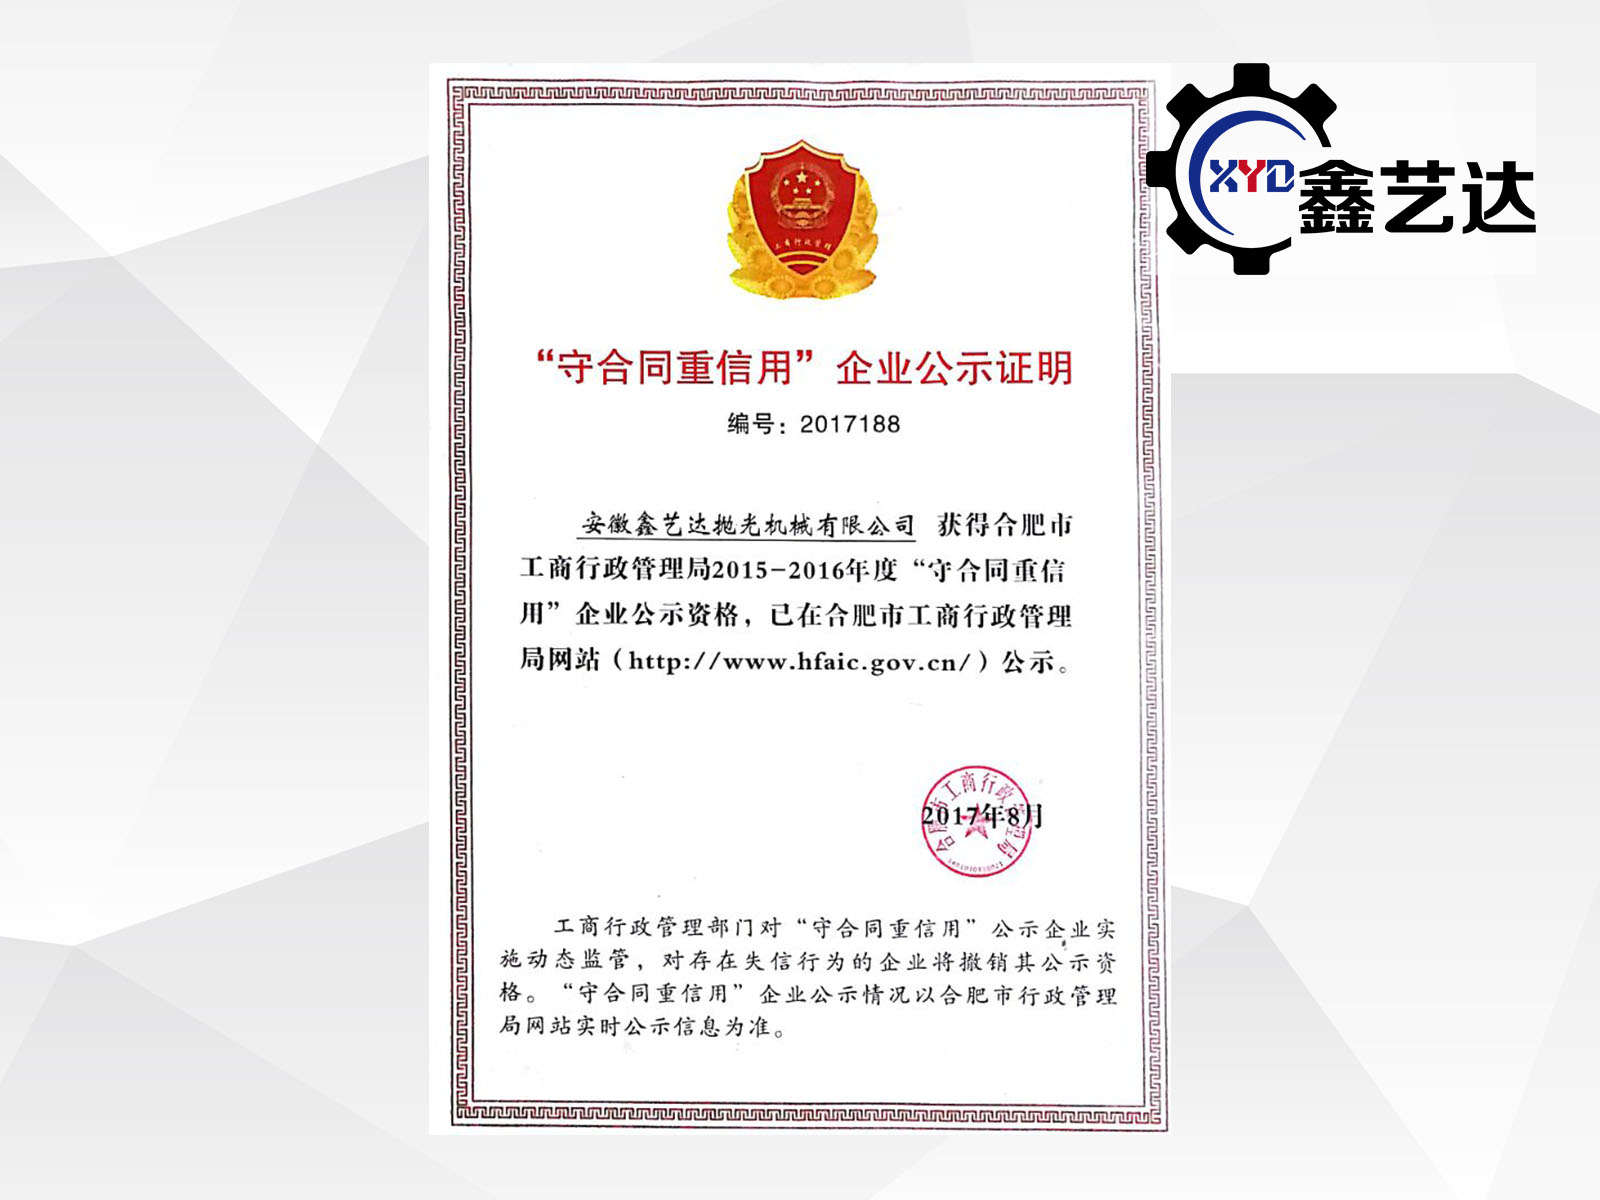 Anhui Xinyida Polishing Machinery Co., Ltd. won the honorary title of “Contract-honoring and Promis